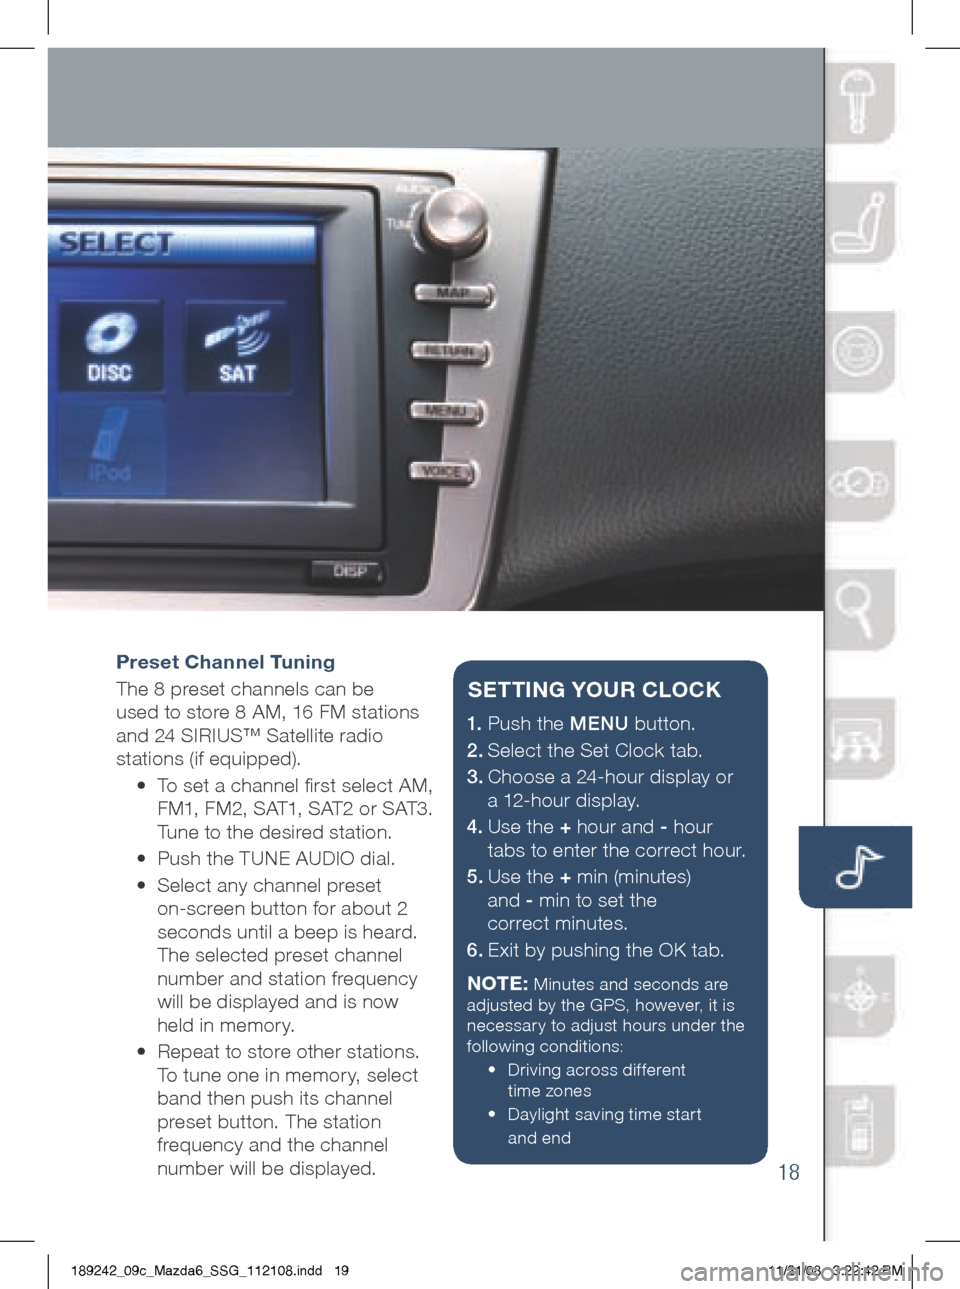 MAZDA MODEL 6 2009  Smart Start Guide (in English) 18
Preset Channel Tuning 
The	8	preset	channels	can	be	 
used 	to 	store 	8 	AM, 	16 	FM 	stations	
and	24	SIRIUS™	Satellite	radio 	
stations	(if	equipped). 	
	 •	 	 To	set	a	channel	first	select	